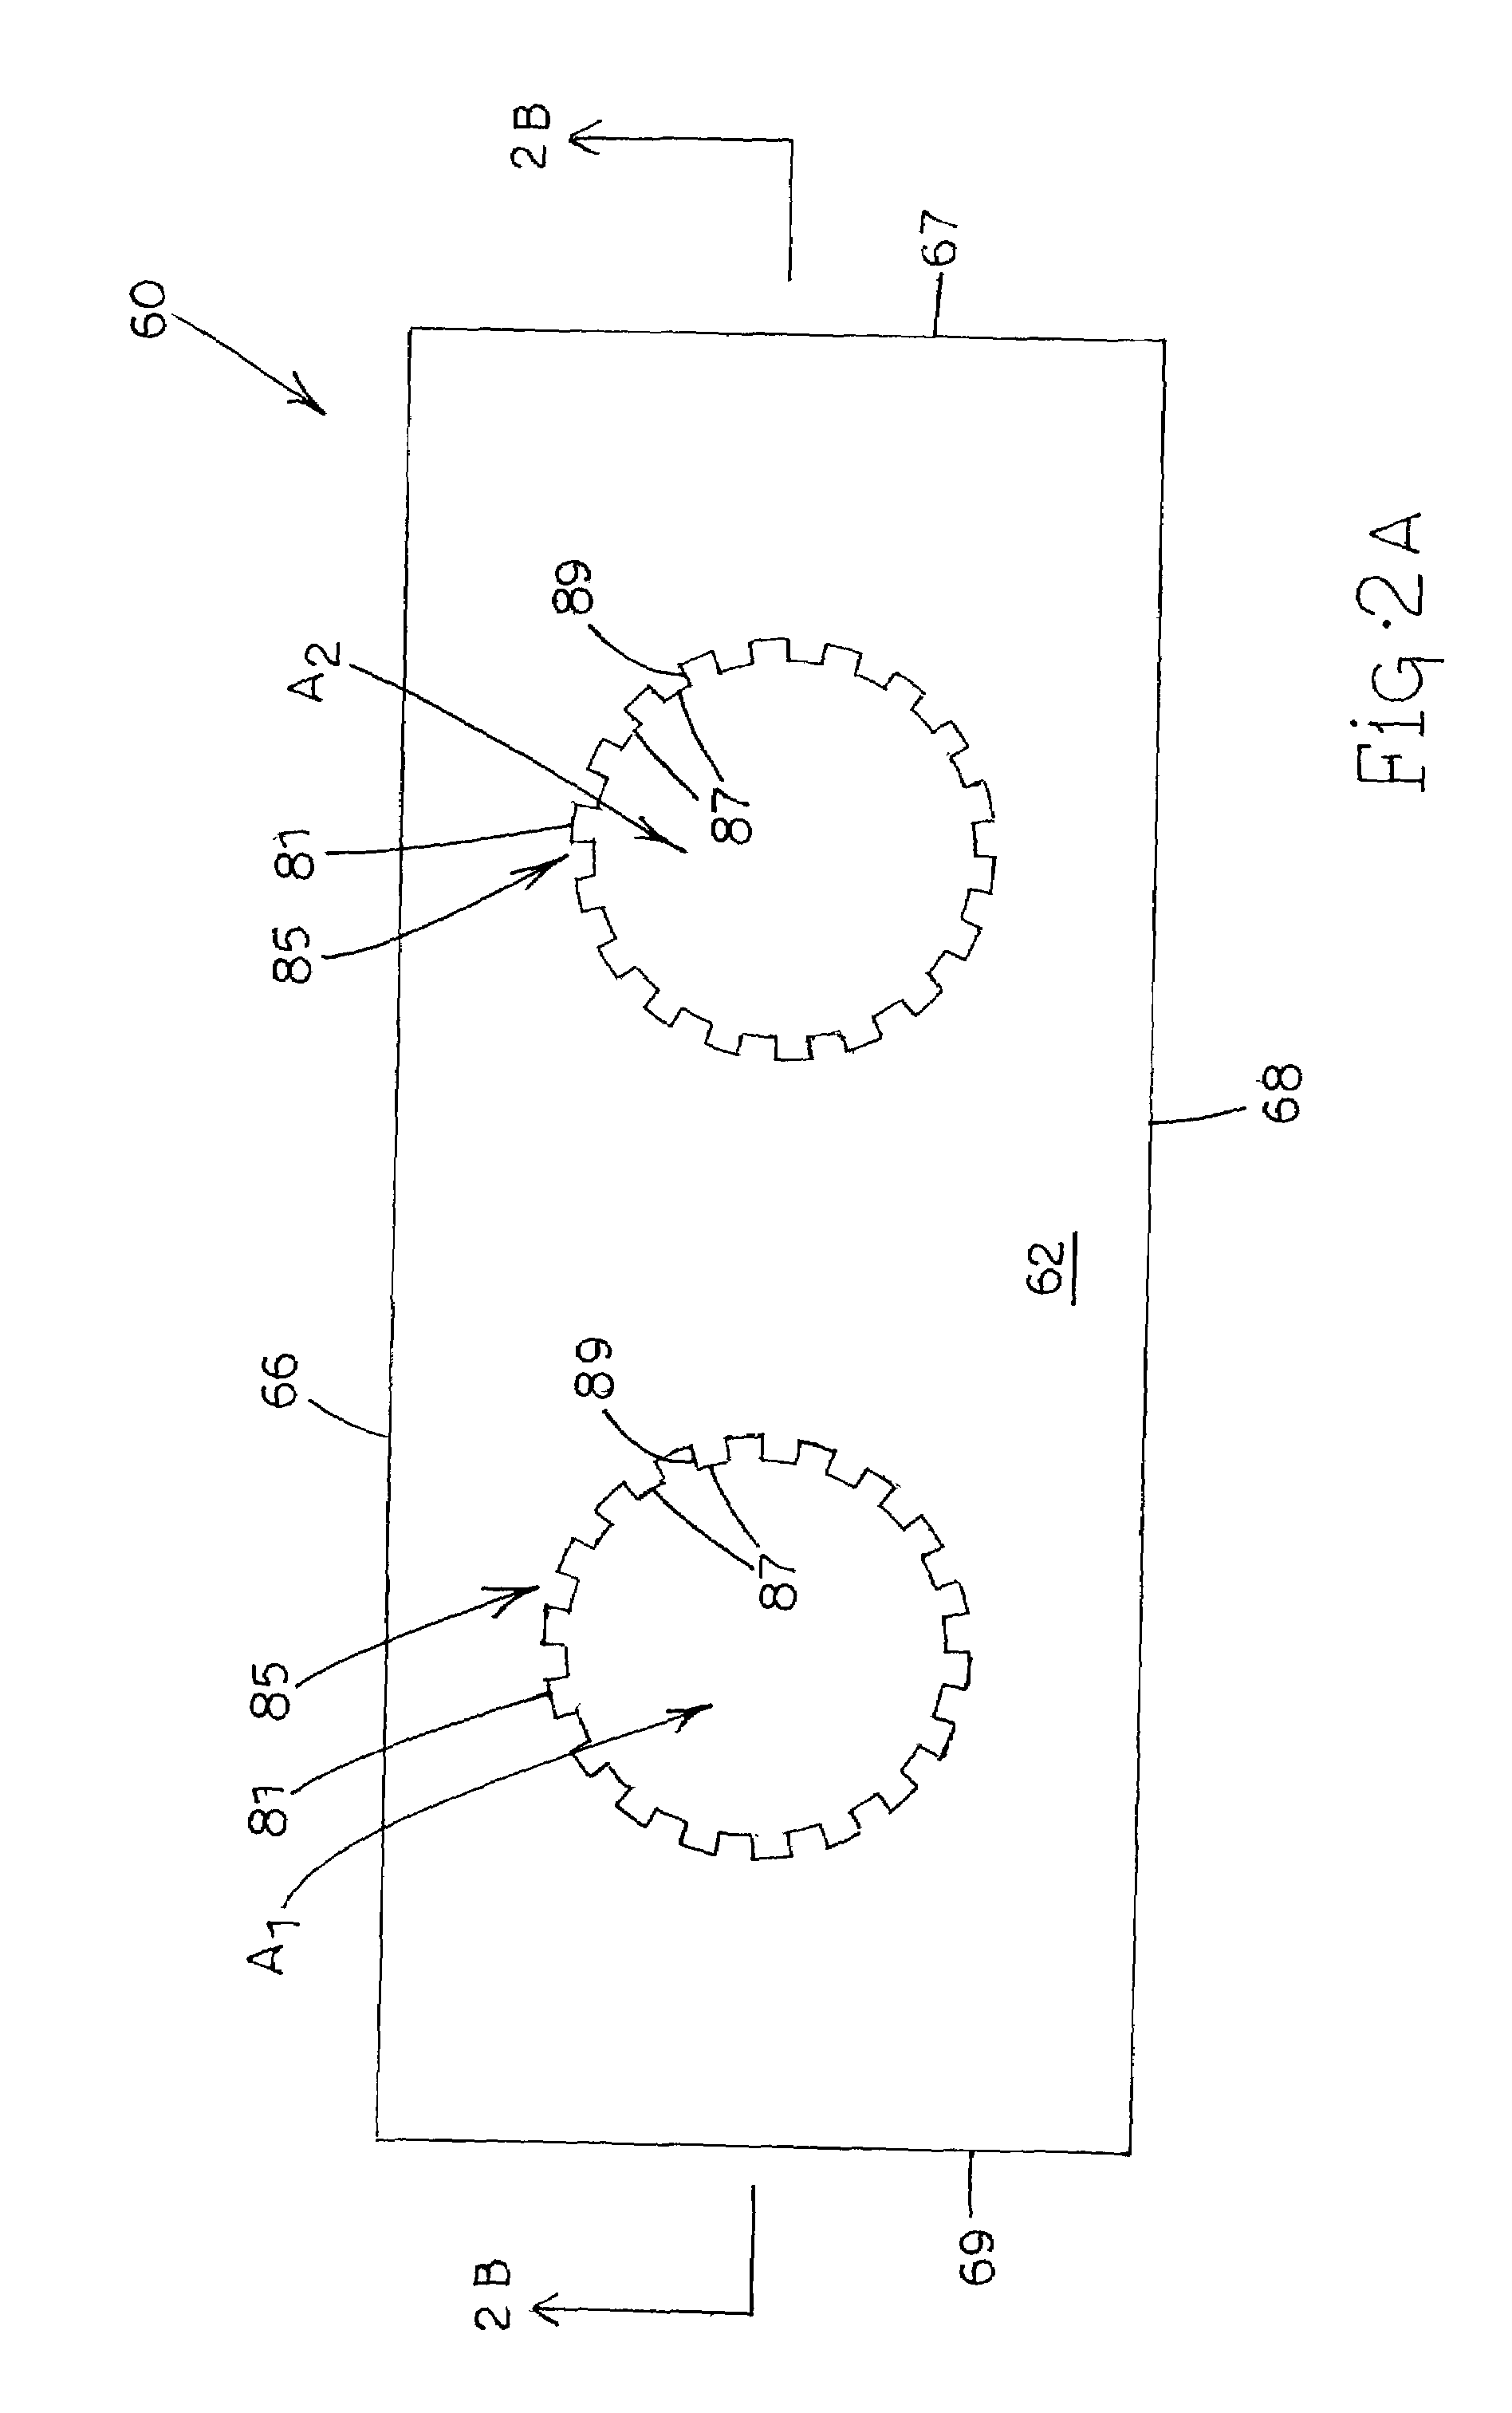 Multi-angular fastening apparatus and method for surgical bone screw/plate systems